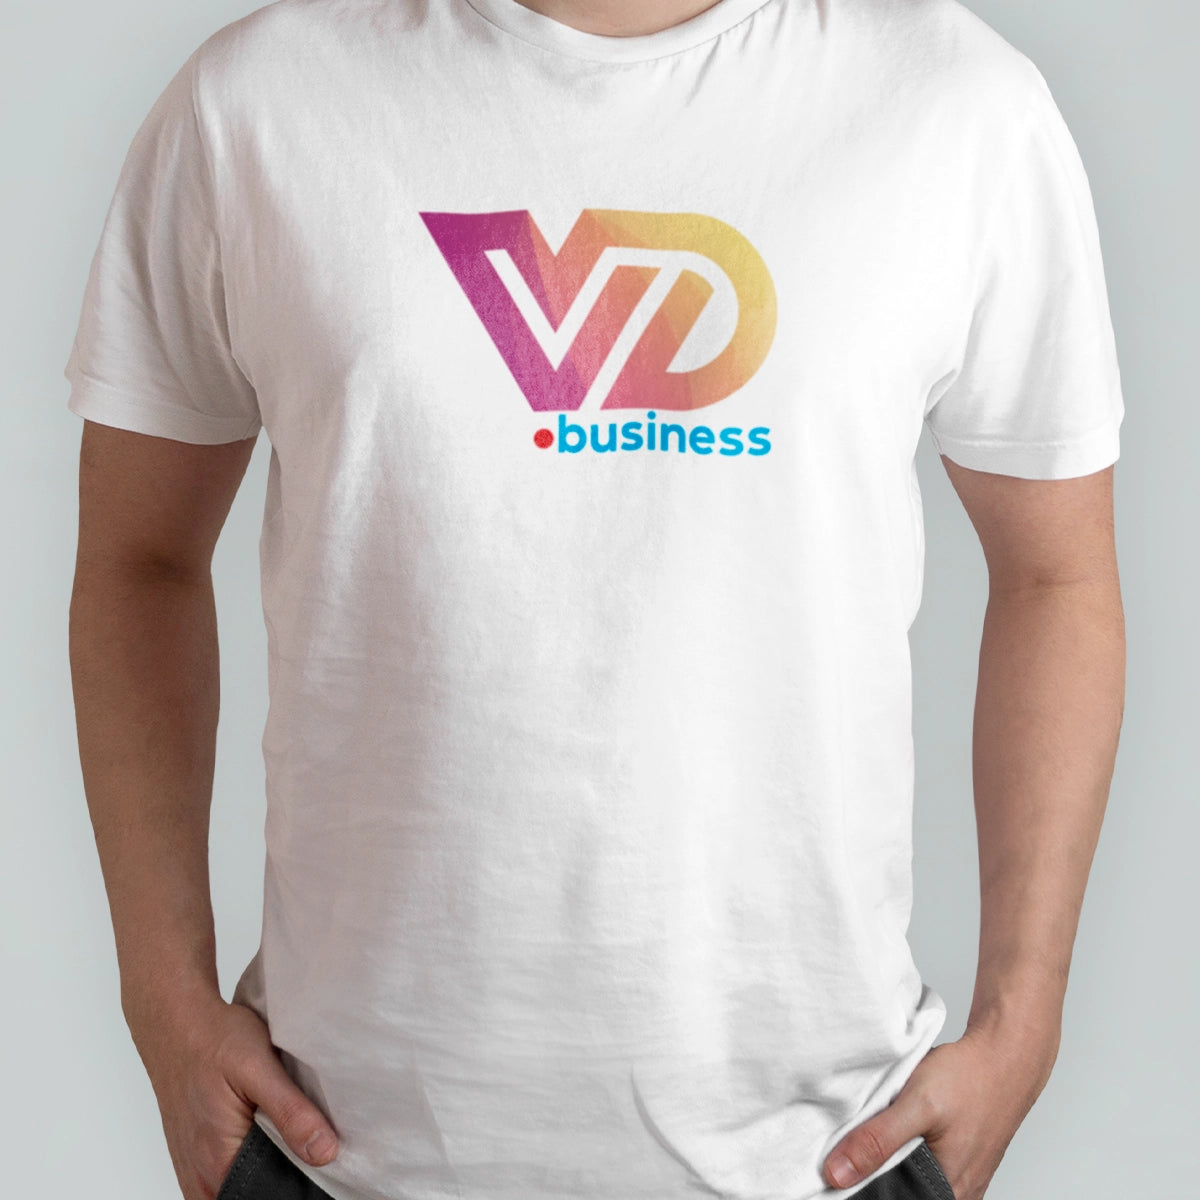 vd.business